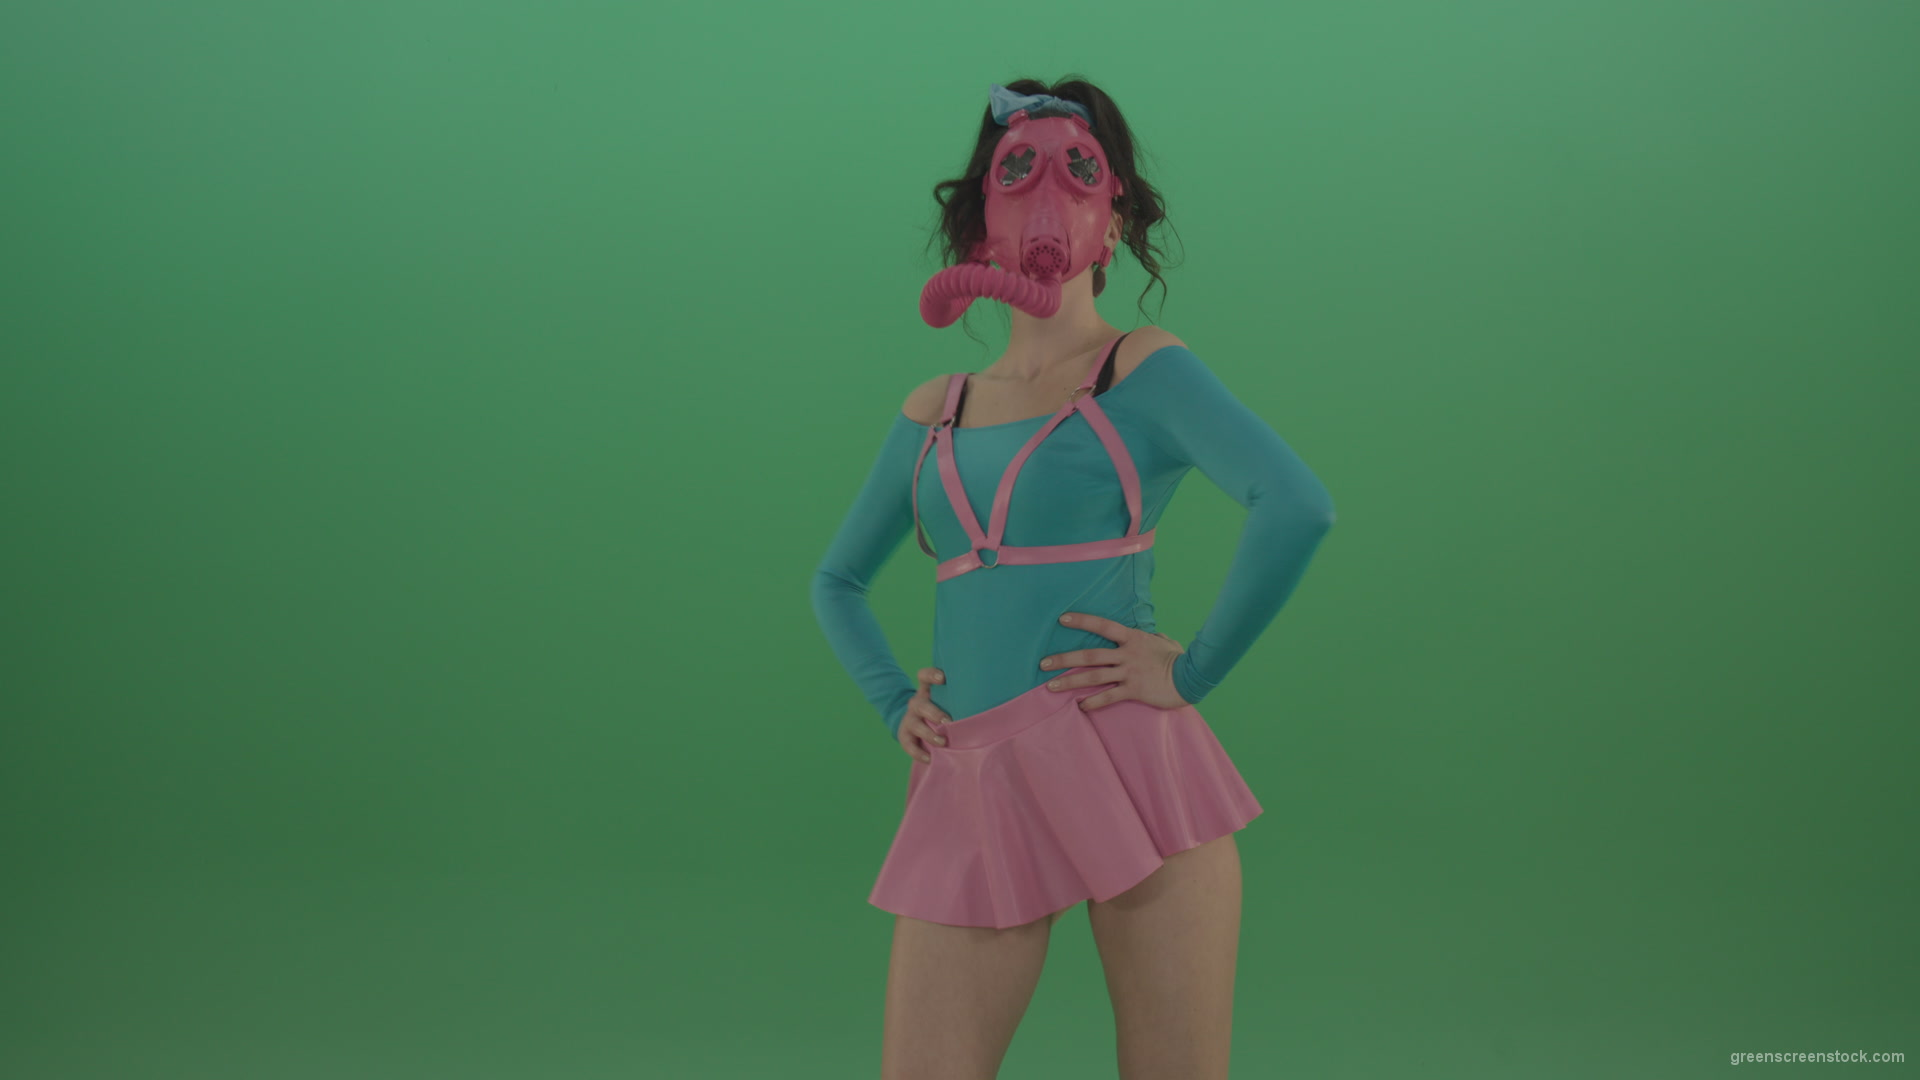 Beautiful-erotic-dance-from-a-woman-in-a-mask-in-a-pink-suit-on-green-background_009 Green Screen Stock